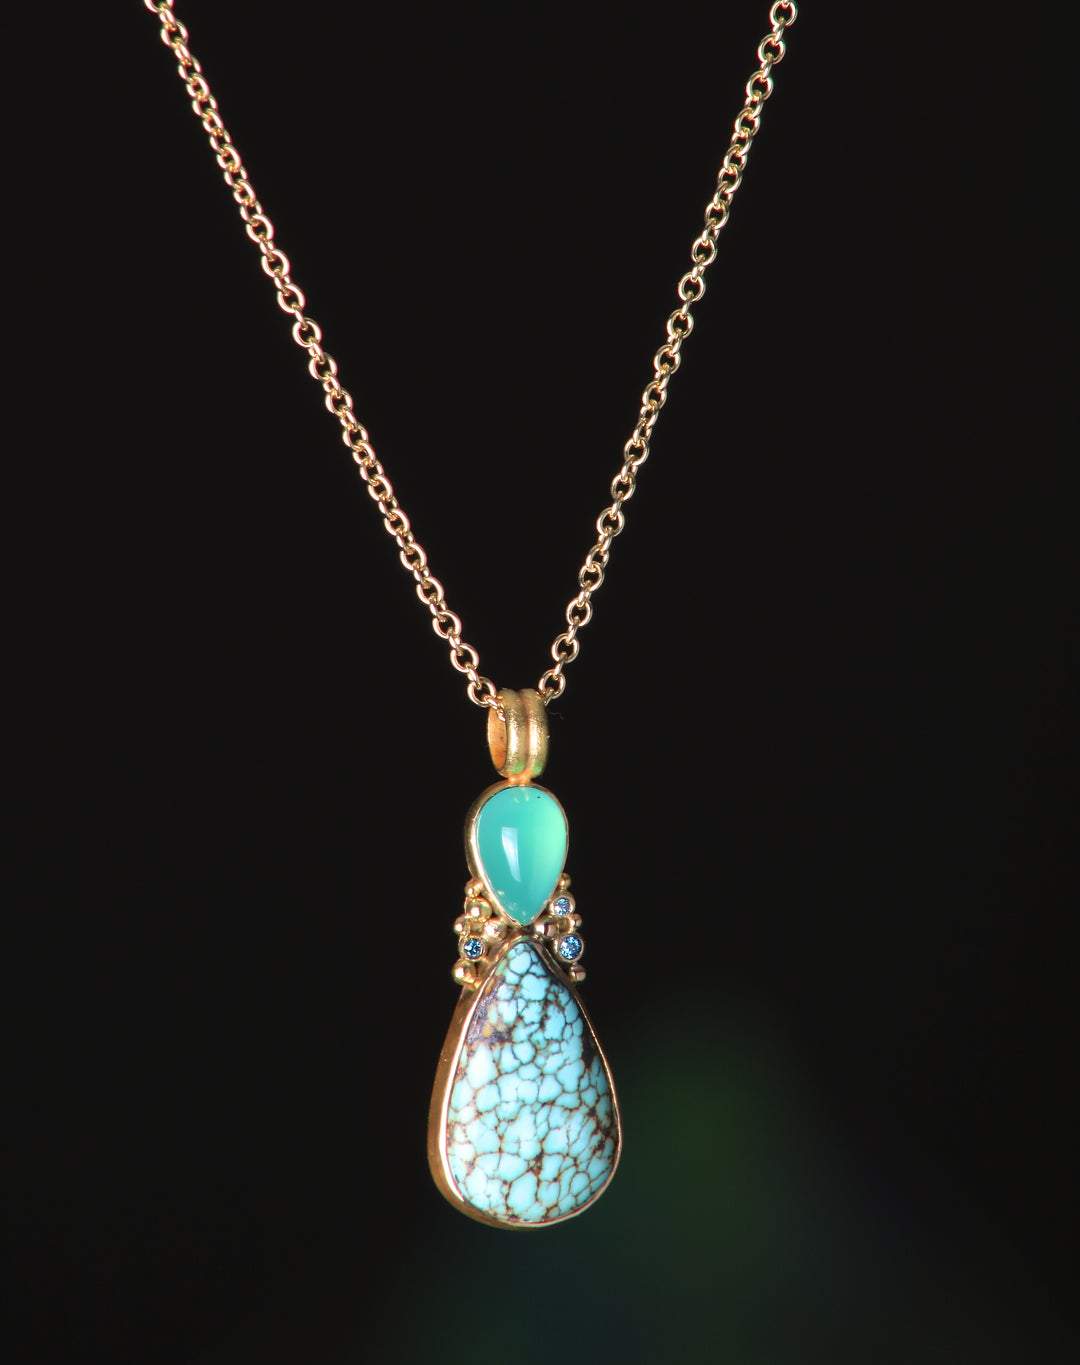 Turquoise and Chrysoprase Drop Pendant 07430 - Ormachea Jewelry